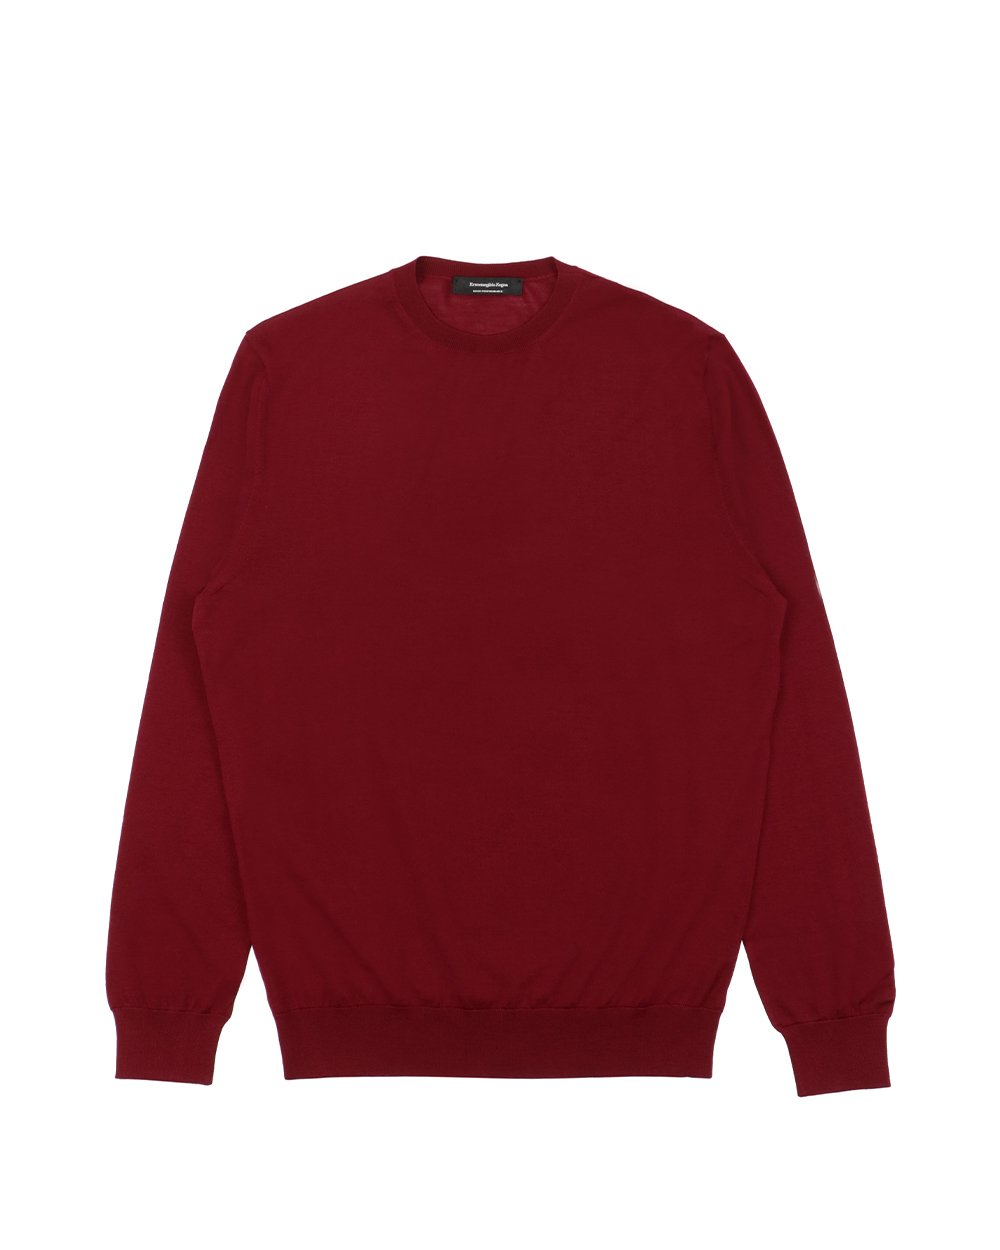 Cotton Long Sleeves Crew Neck Sweatshirt - ISSI Outlet